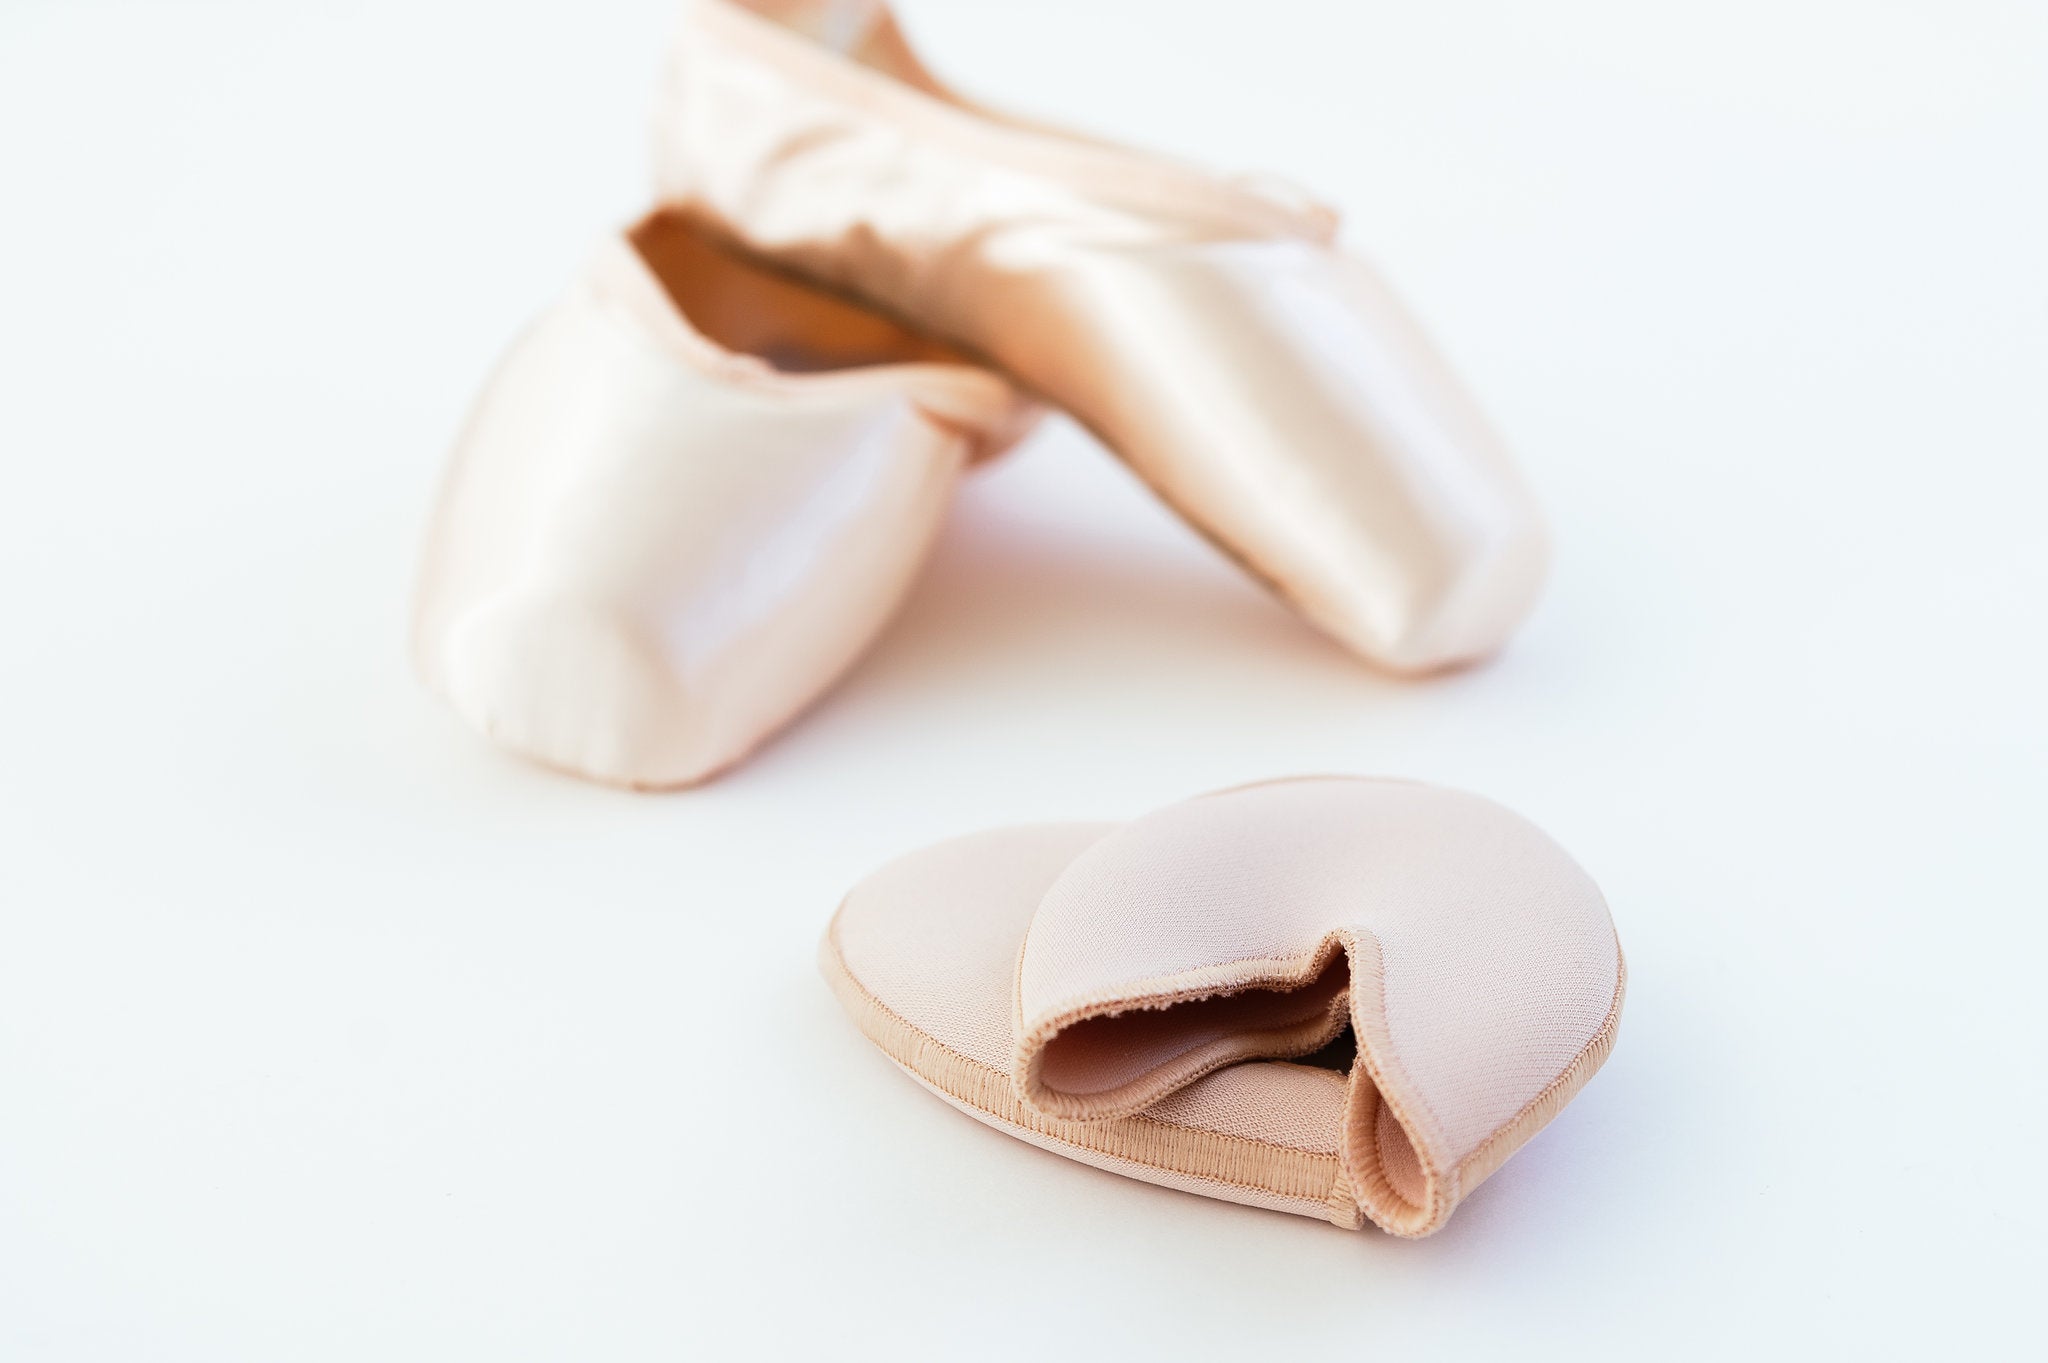 What to Expect at your Pointe Shoe Fitting: